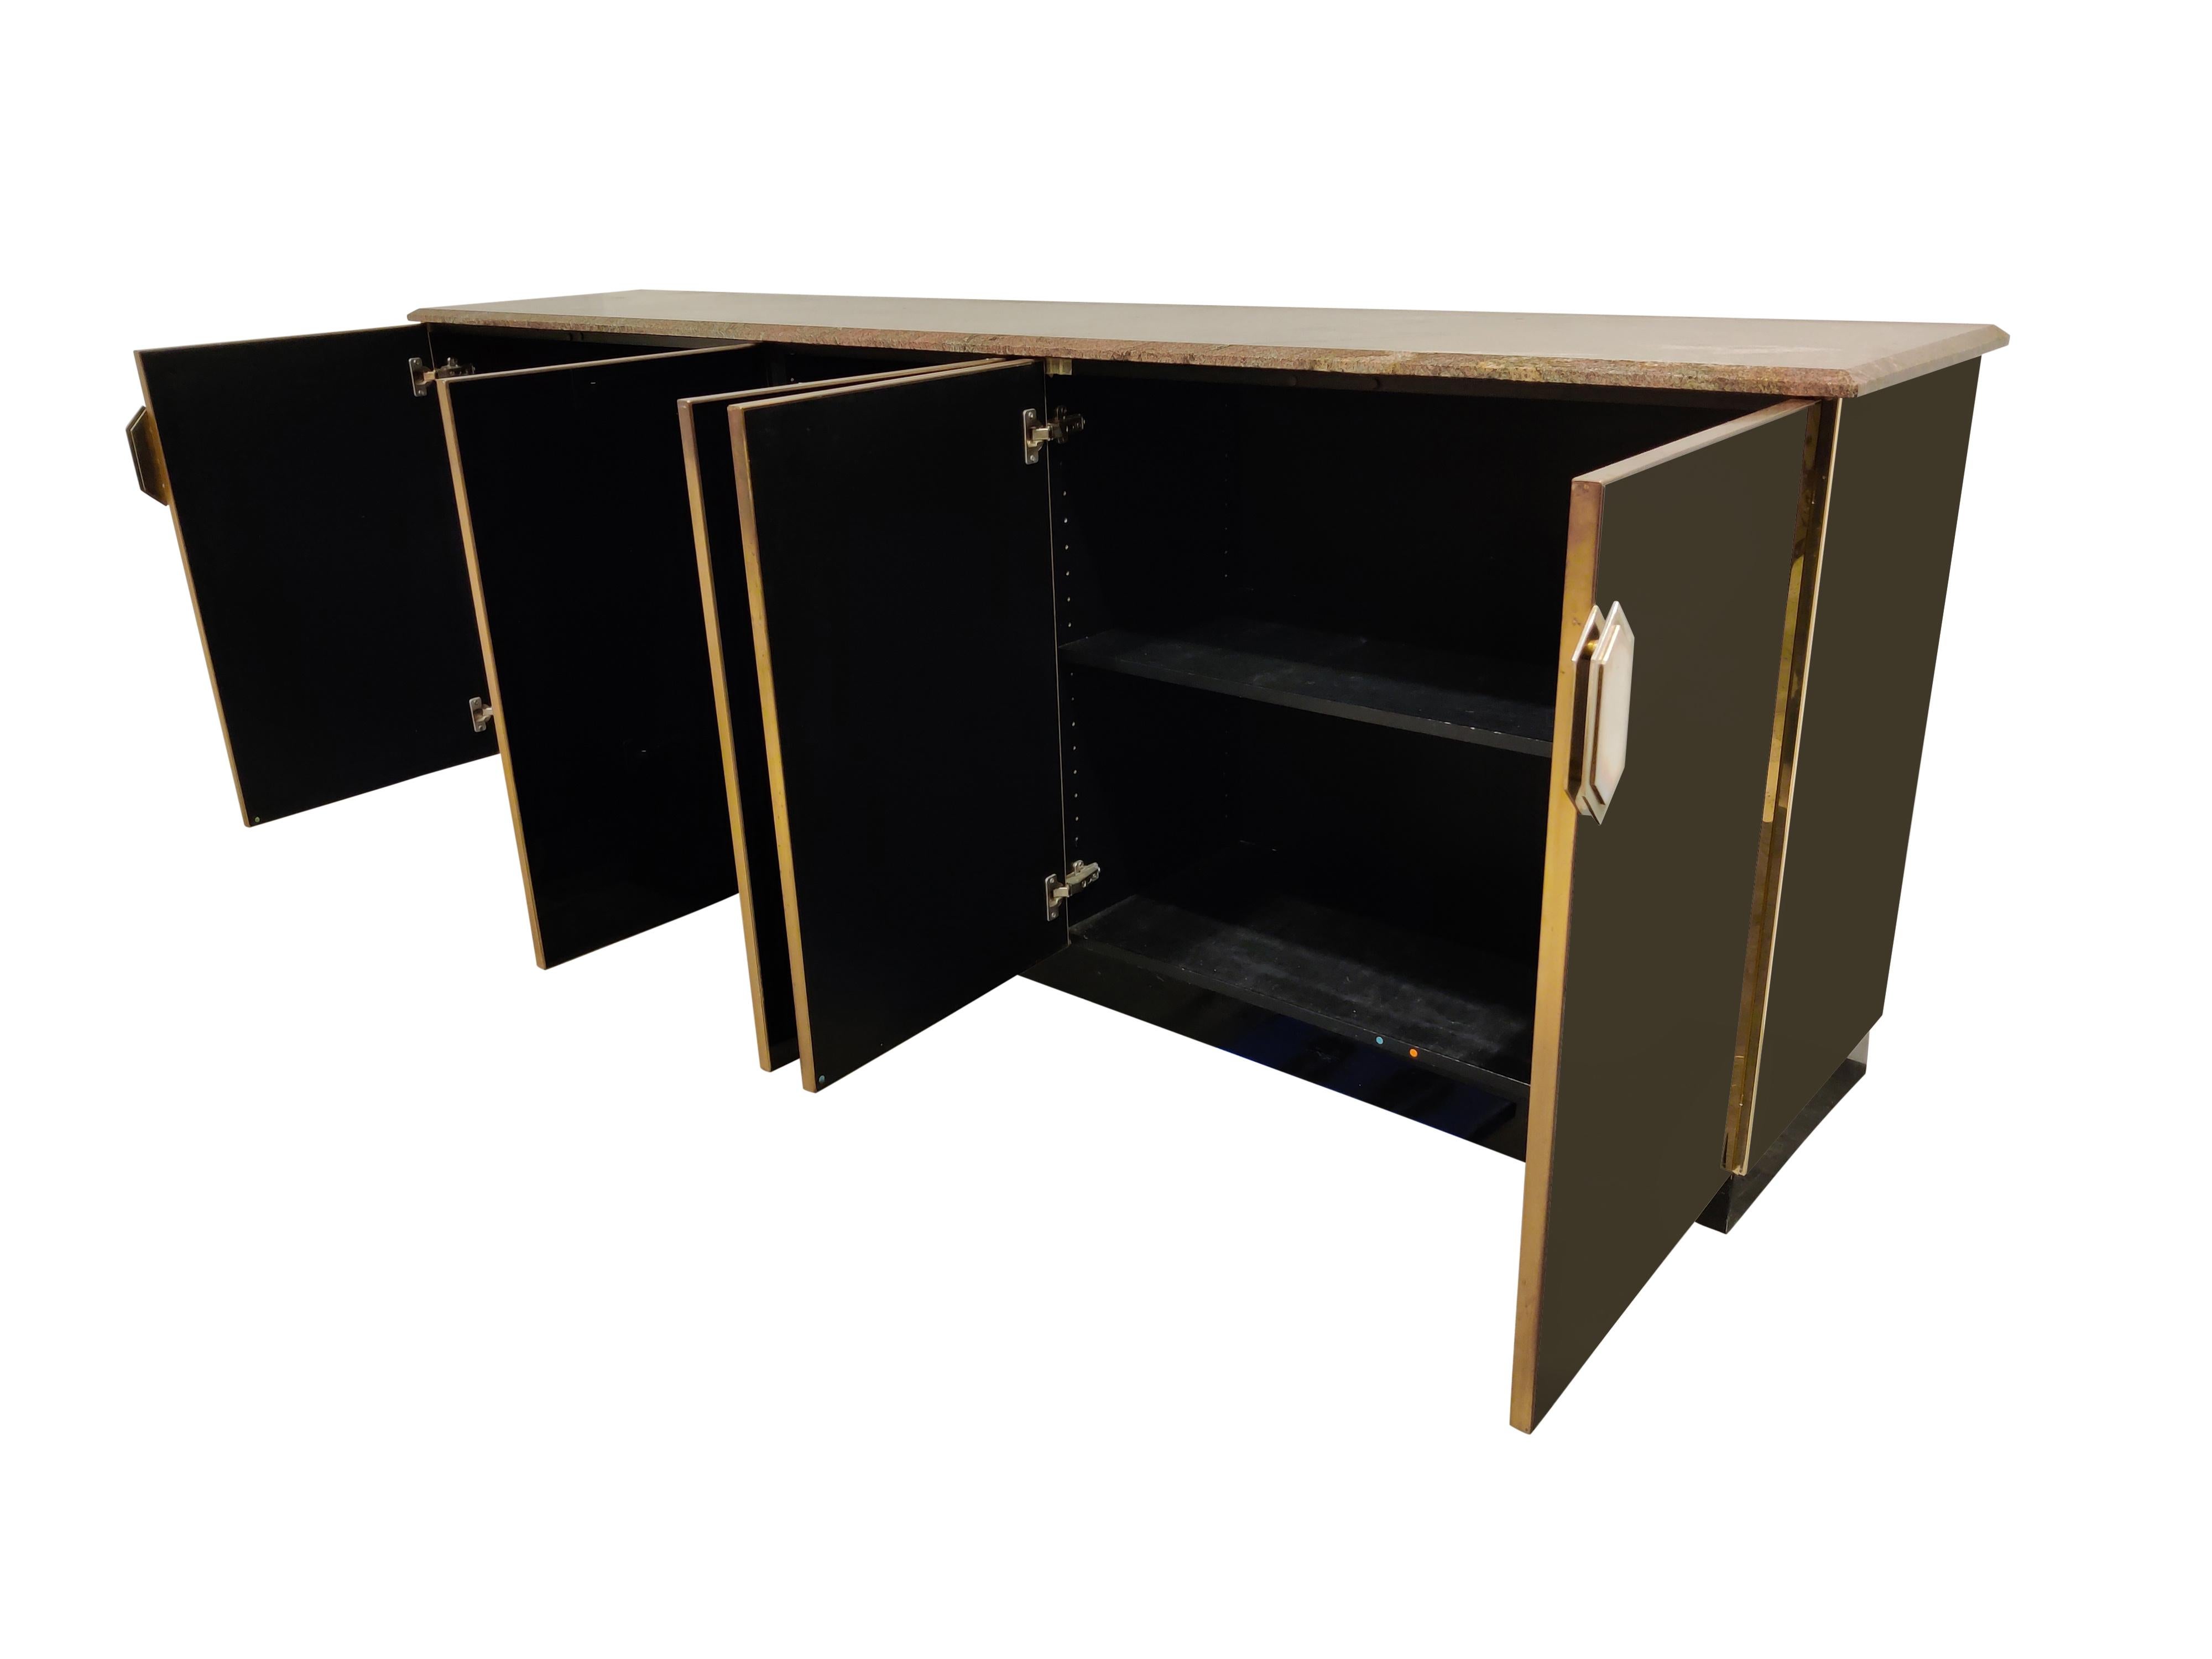 Hollywood Regency black glass and brass credenza with a beautiful granite stone top.

It features 5 doors with unique handles. 

This pieces gives a great touch of 1970s/1980s glamour to your room.

1970s - France

Good condition with normal